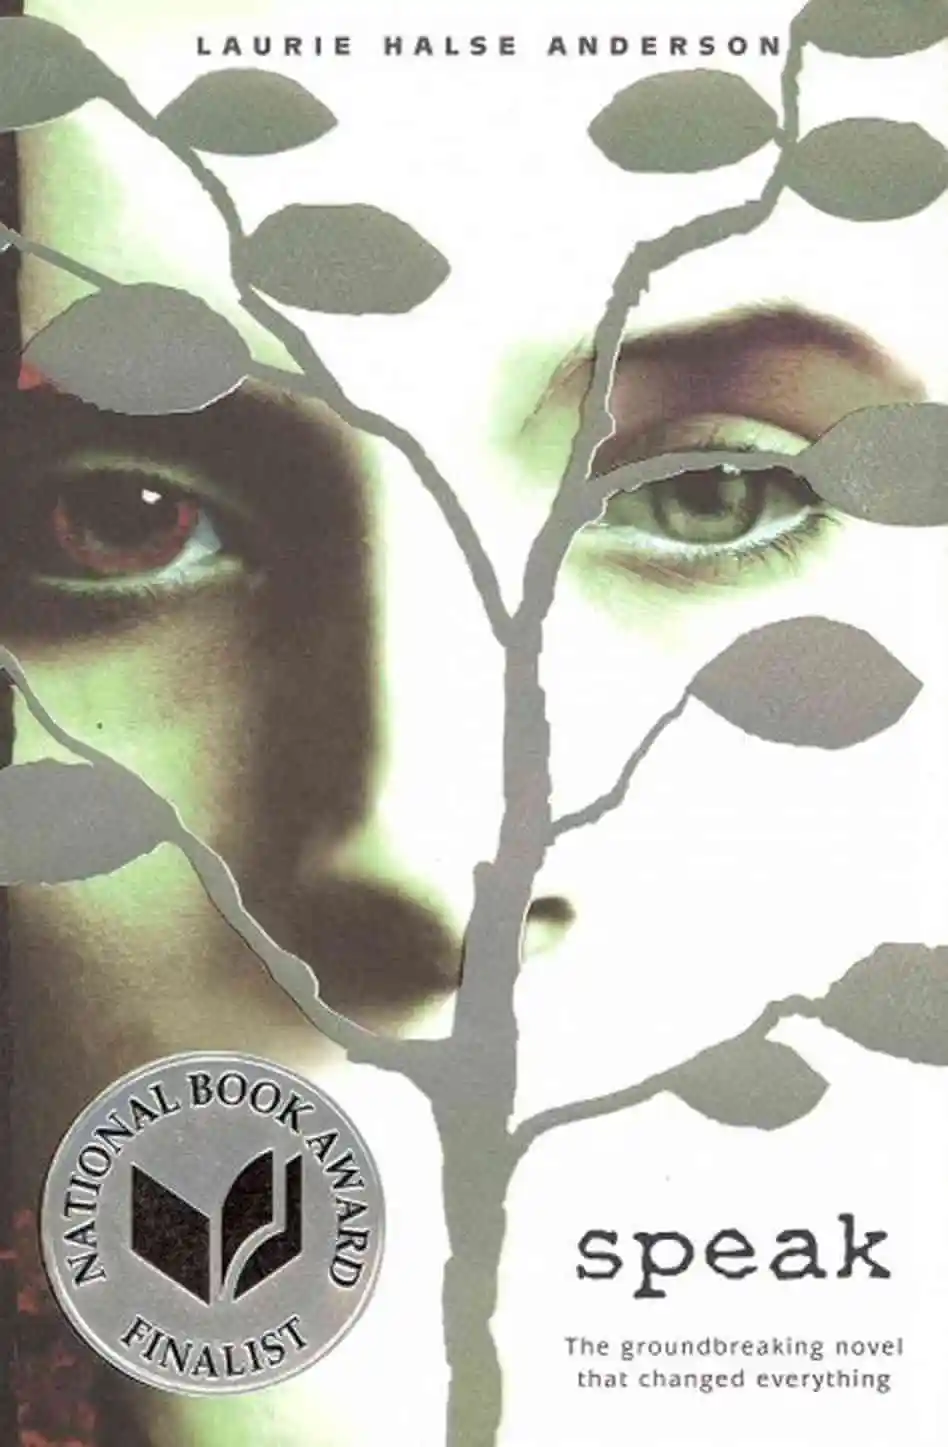 Speak by Laurie Halse Anderson - middle school books 